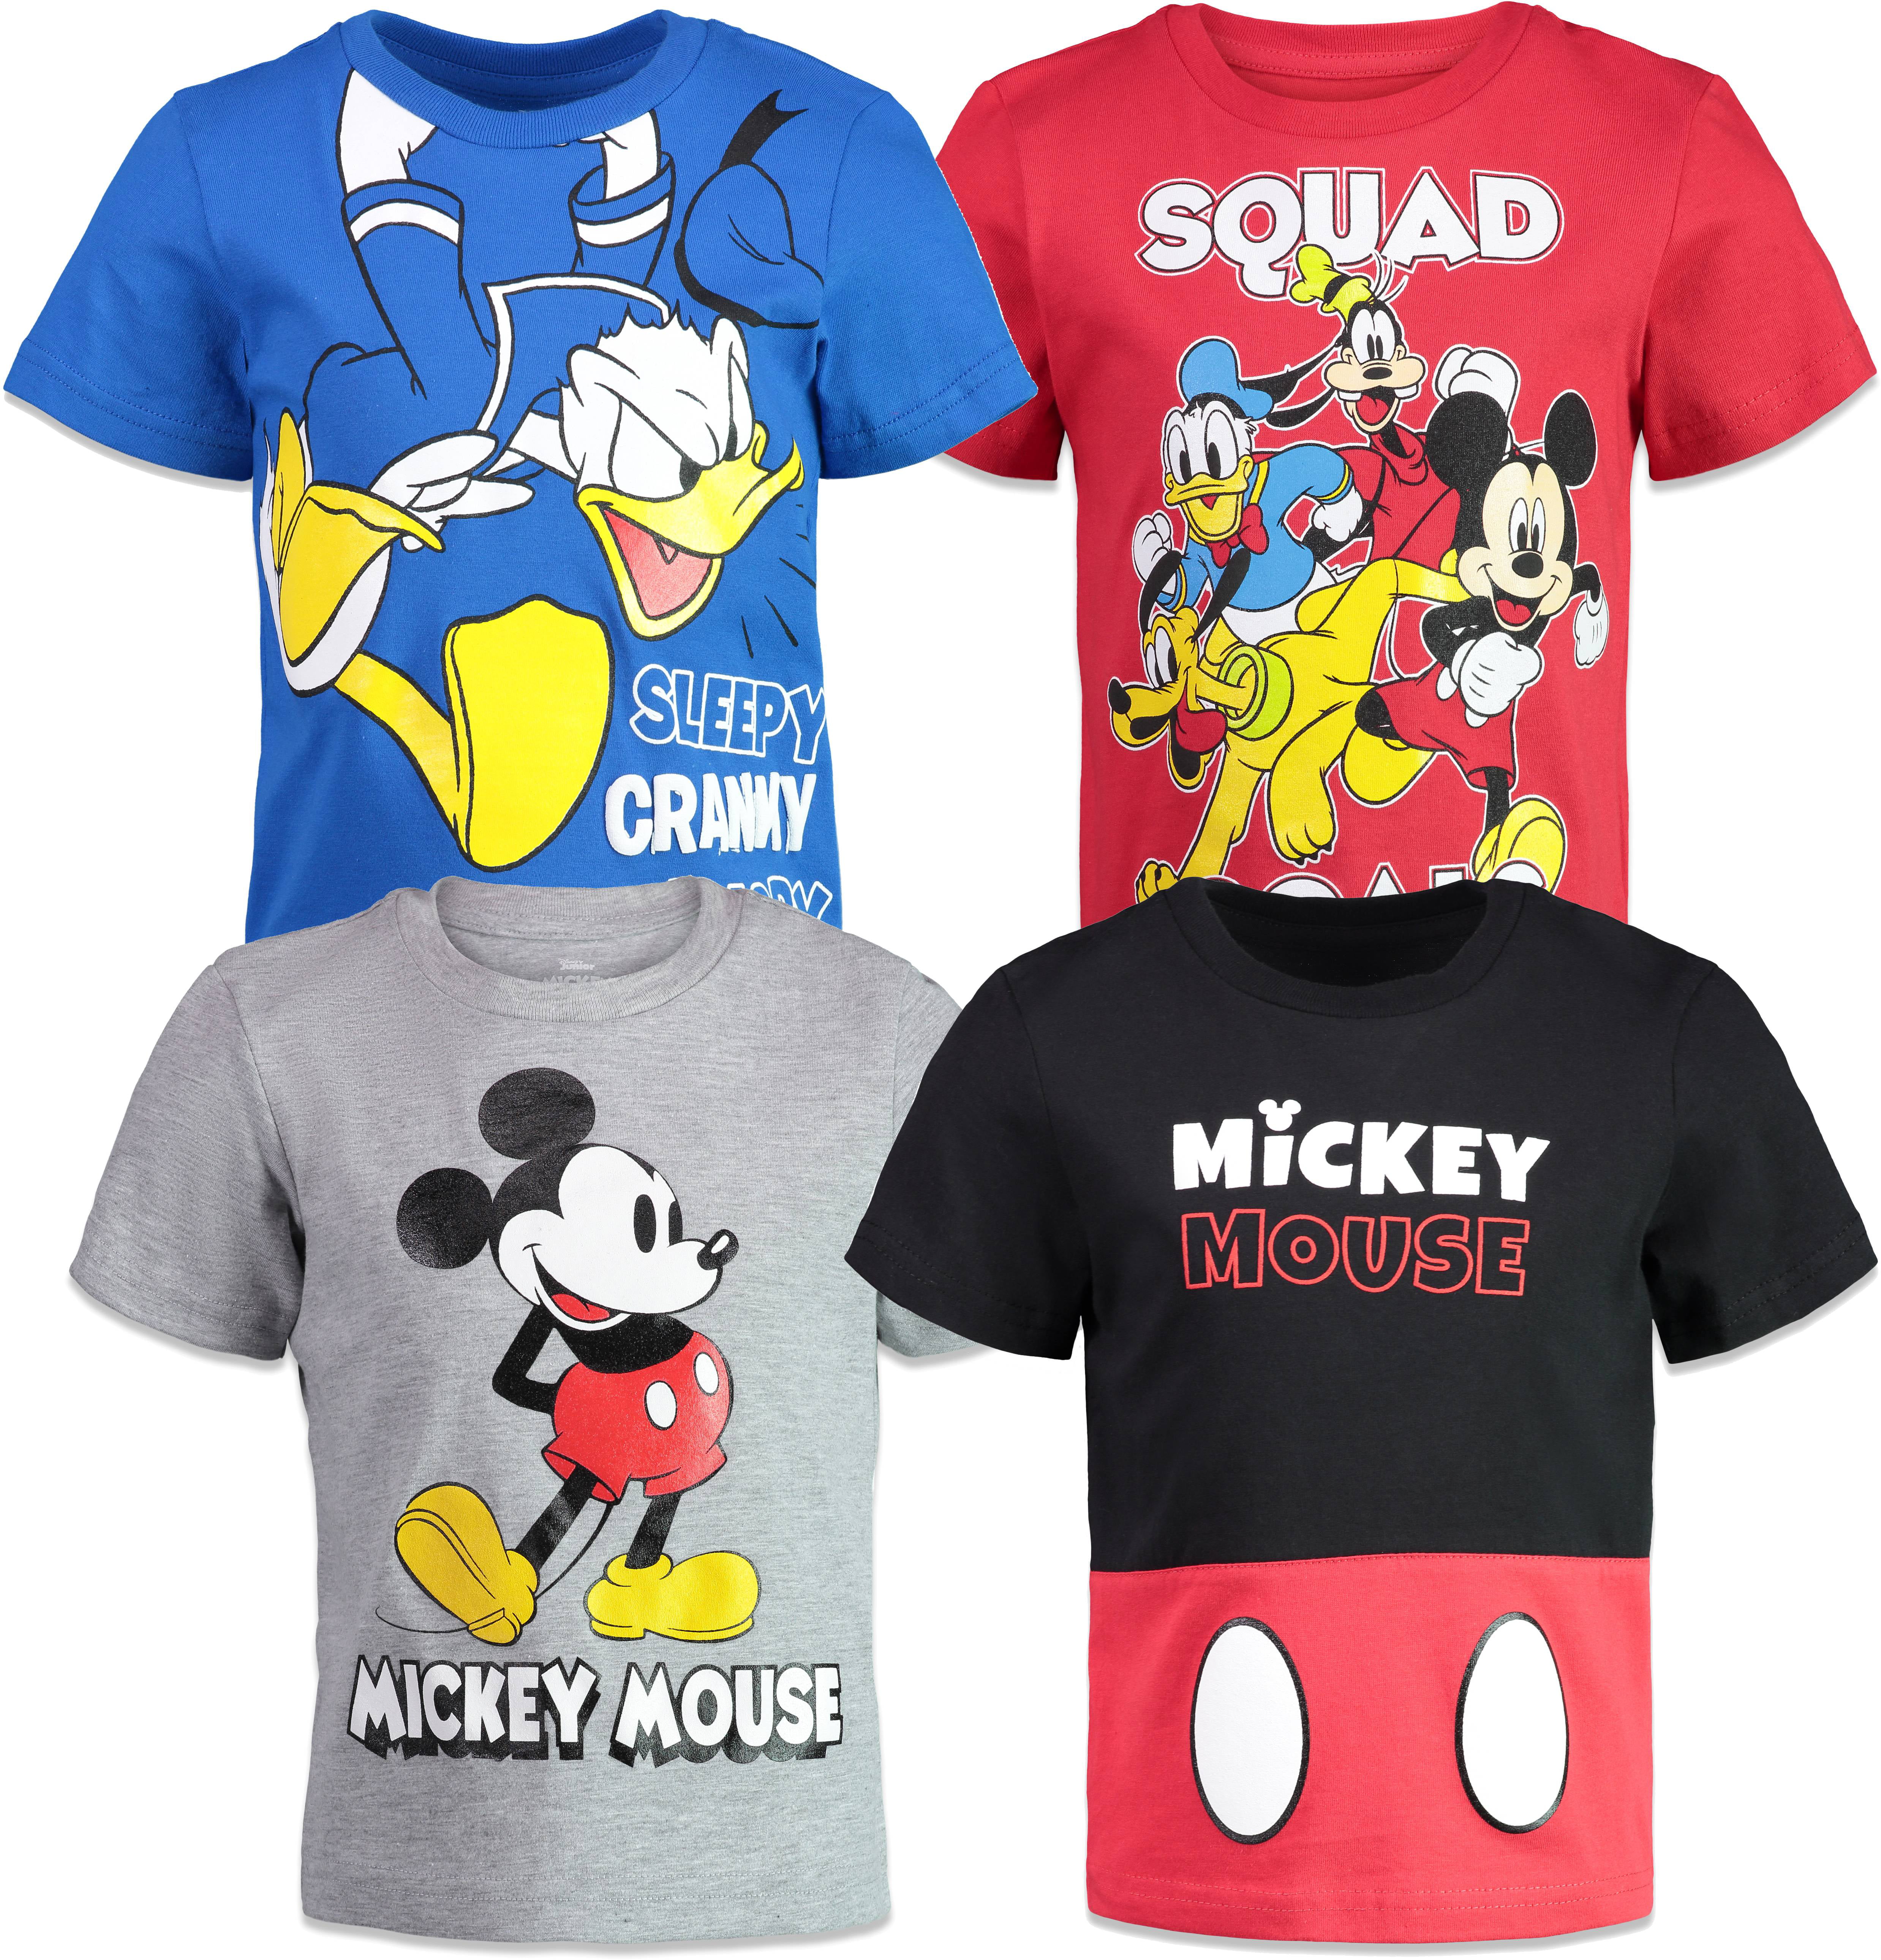 Classic Mickey Mouse Squad graphic T-Shirt Unisex T-shirt Adult Tee Kid Shirts Toddler Baby Onesie Hoodie Sweatshirt Gift